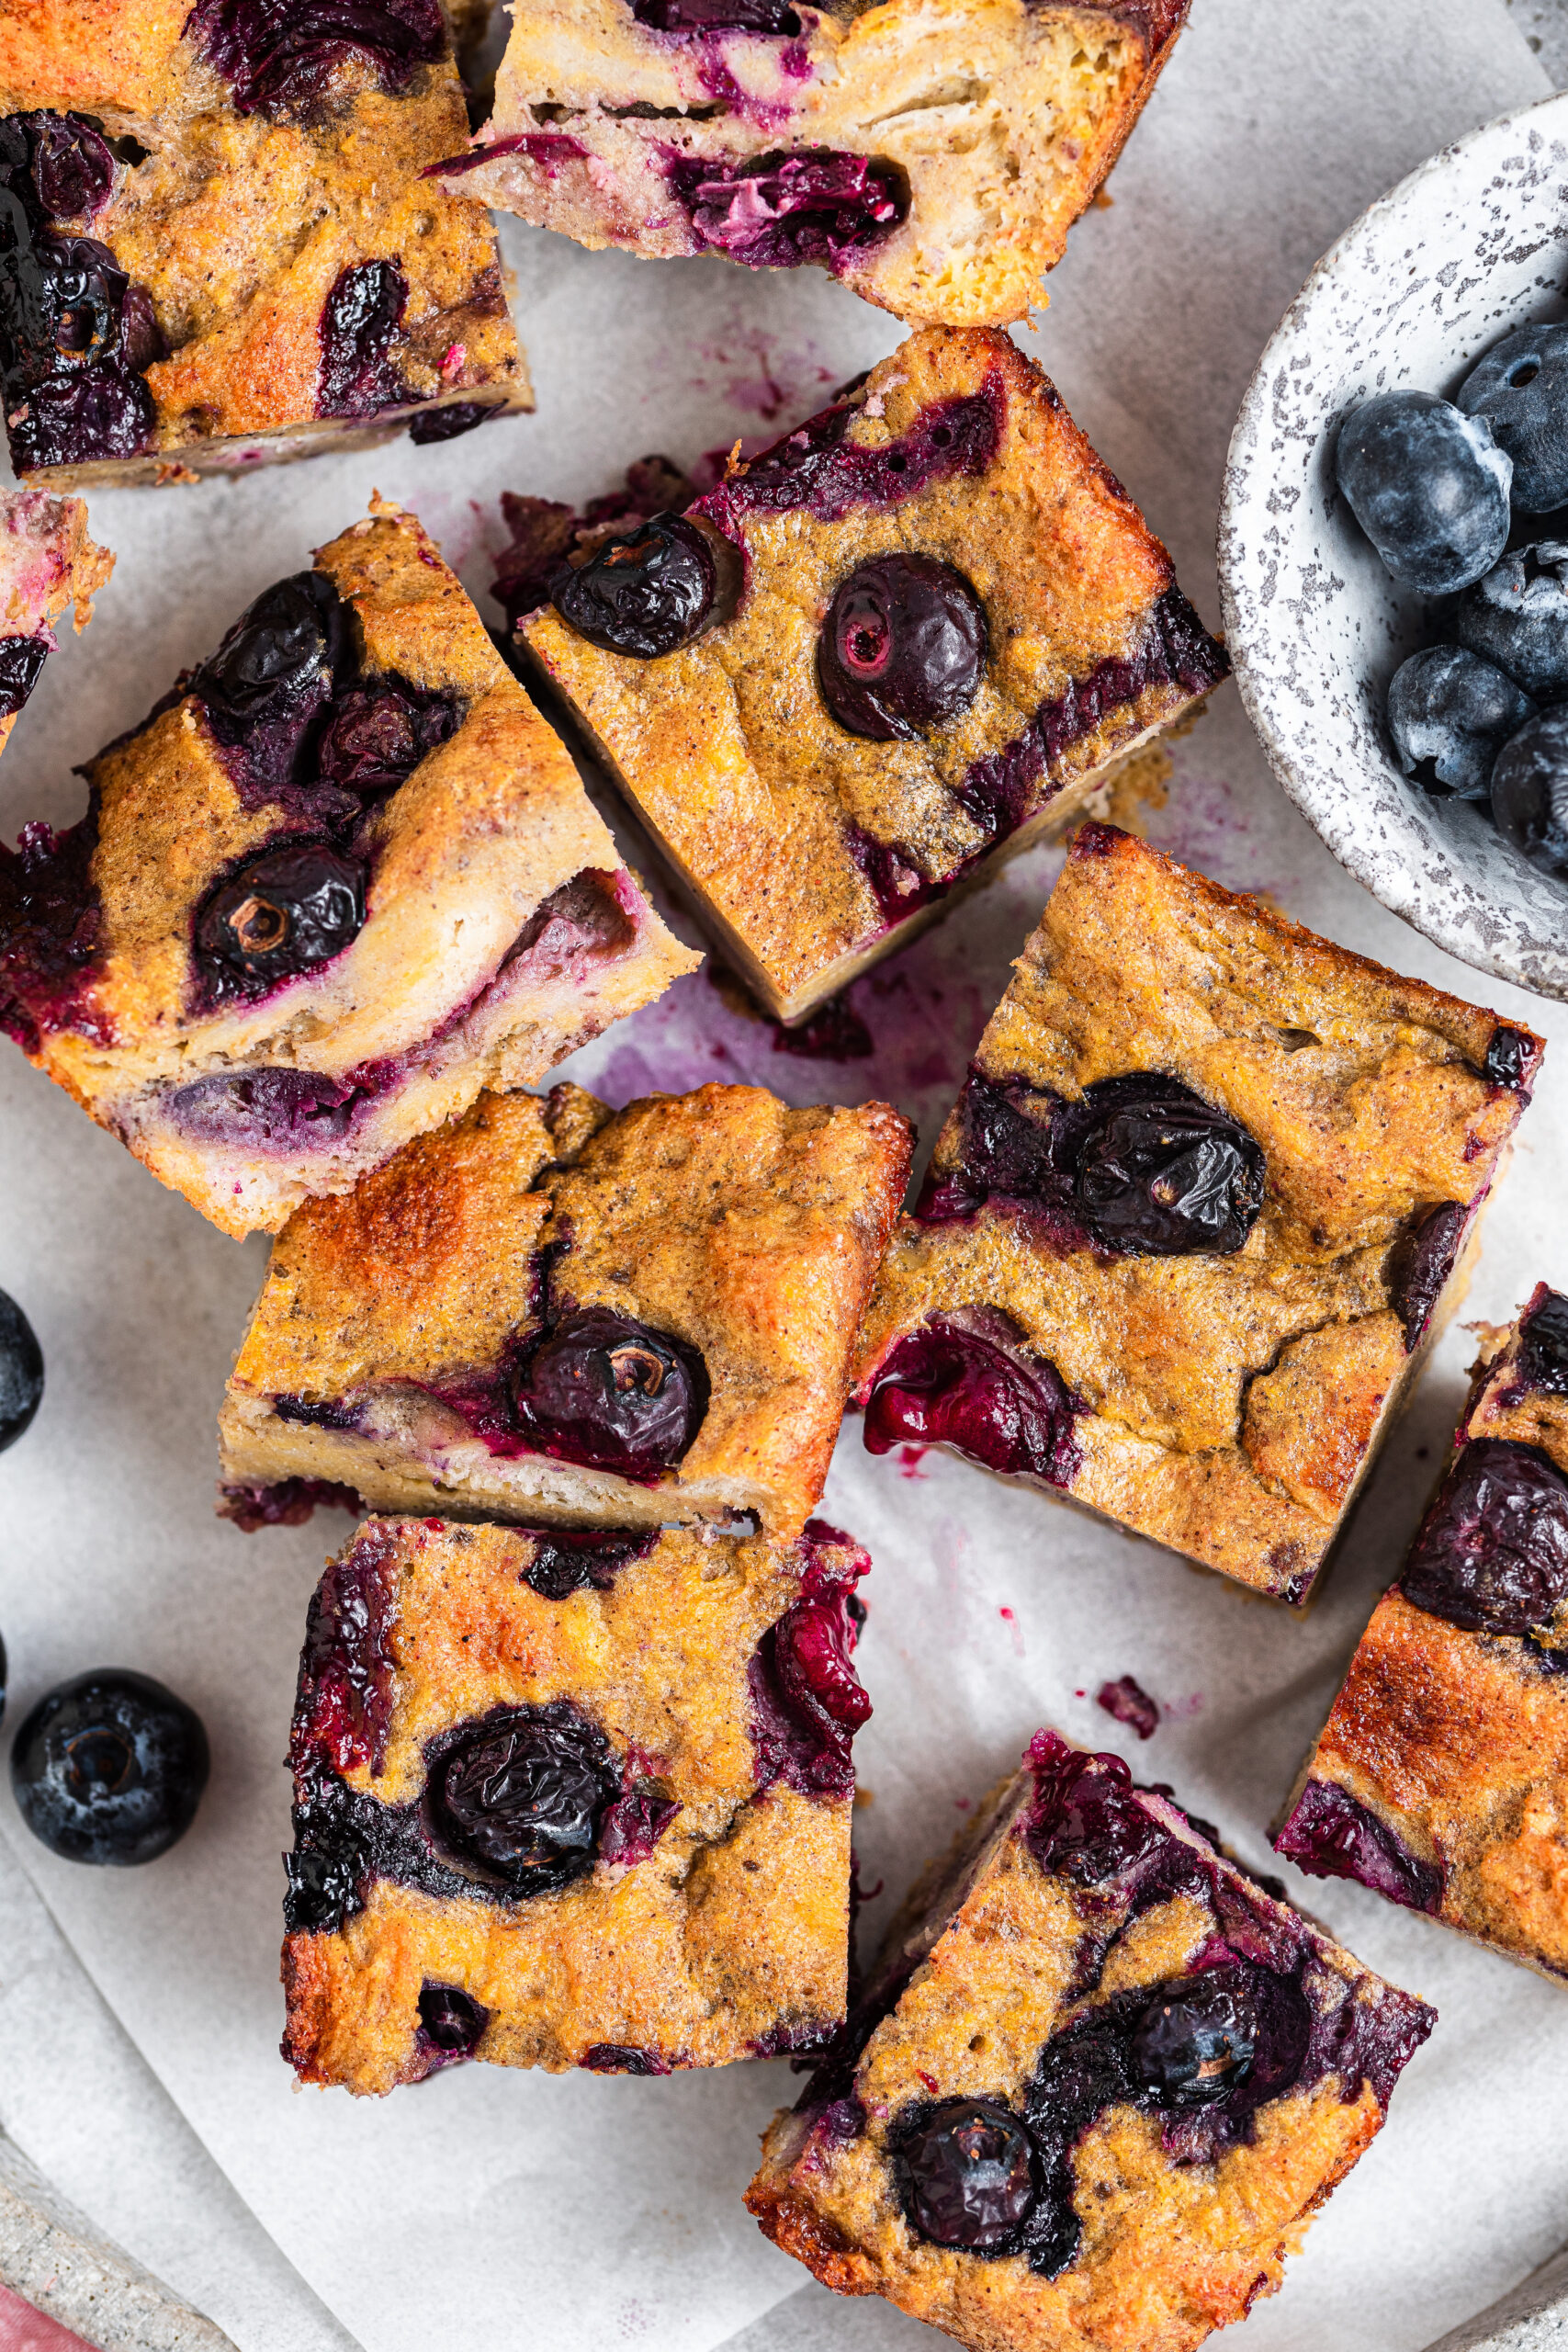 Blueberry French toast bake split into small pieces. Served with blueberries